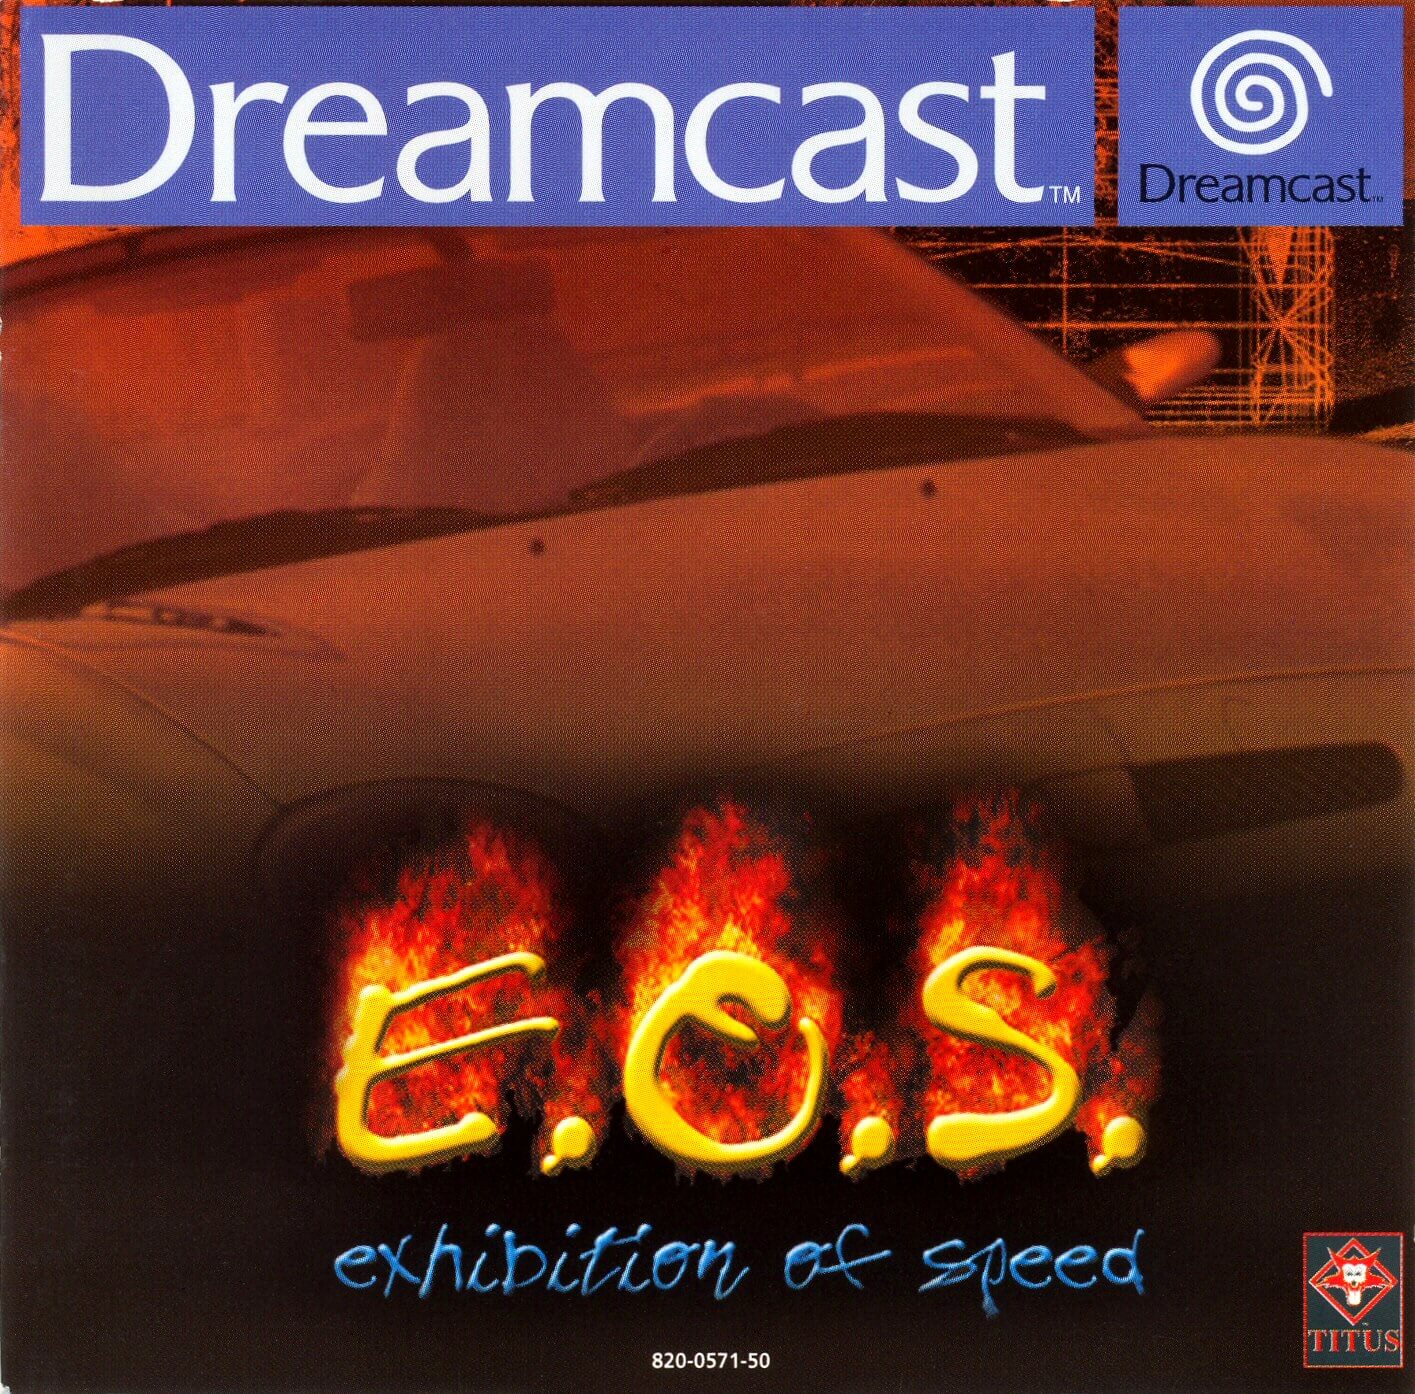 Exhibition of Speed Dreamcast ROM Download